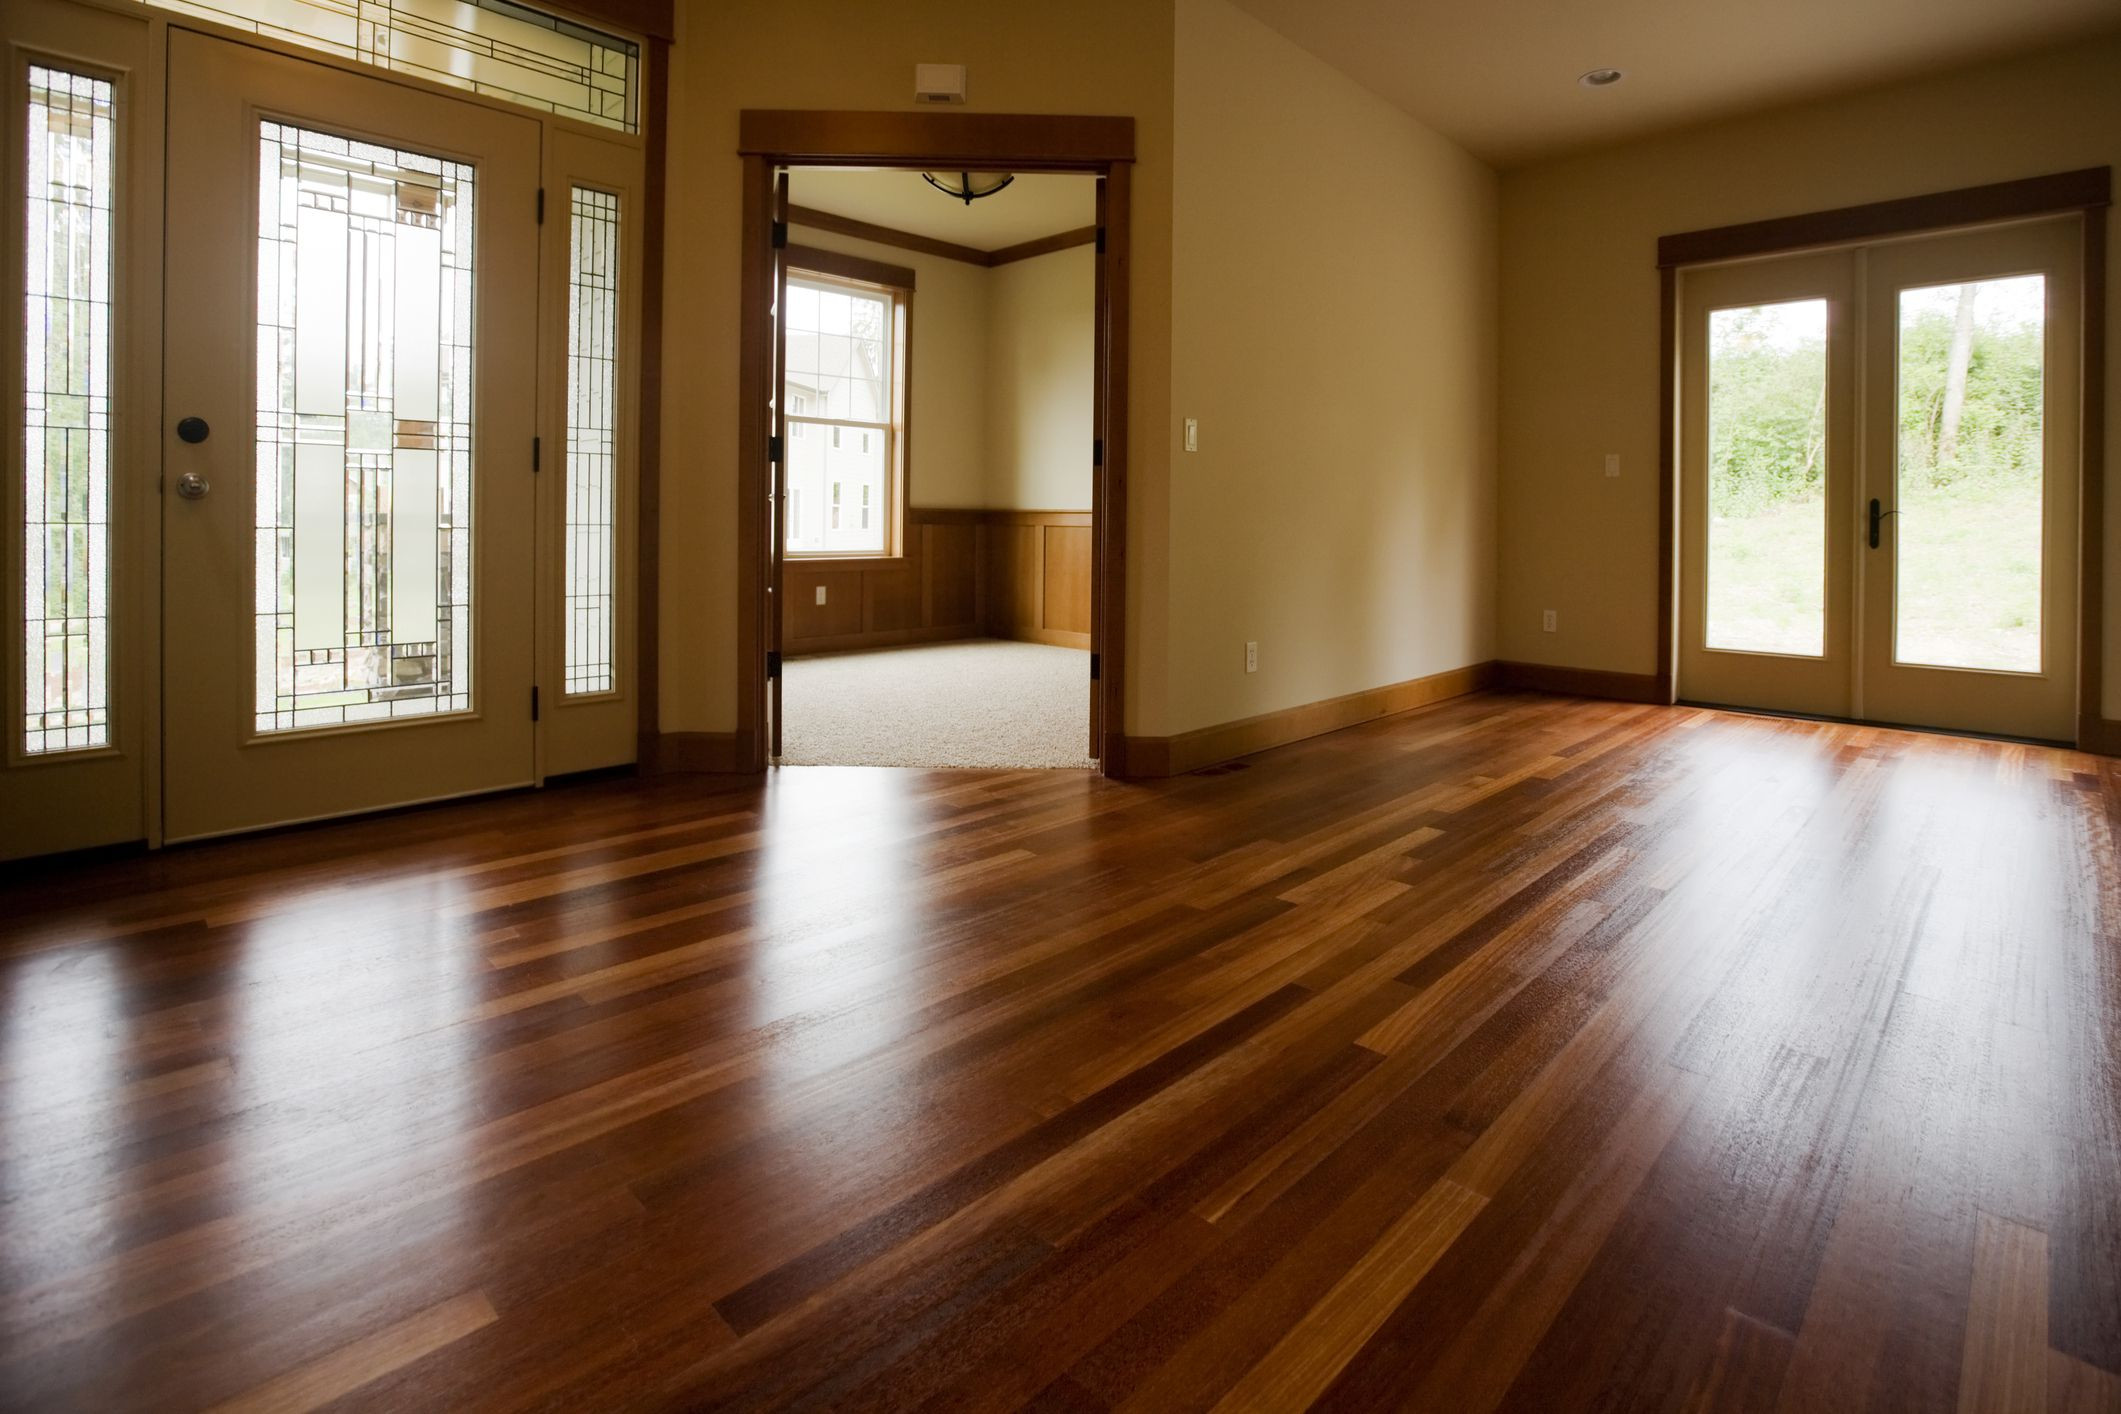 hardwood flooring styles and colors of types of hardwood flooring buyers guide inside gettyimages 157332889 5886d8383df78c2ccd65d4e1